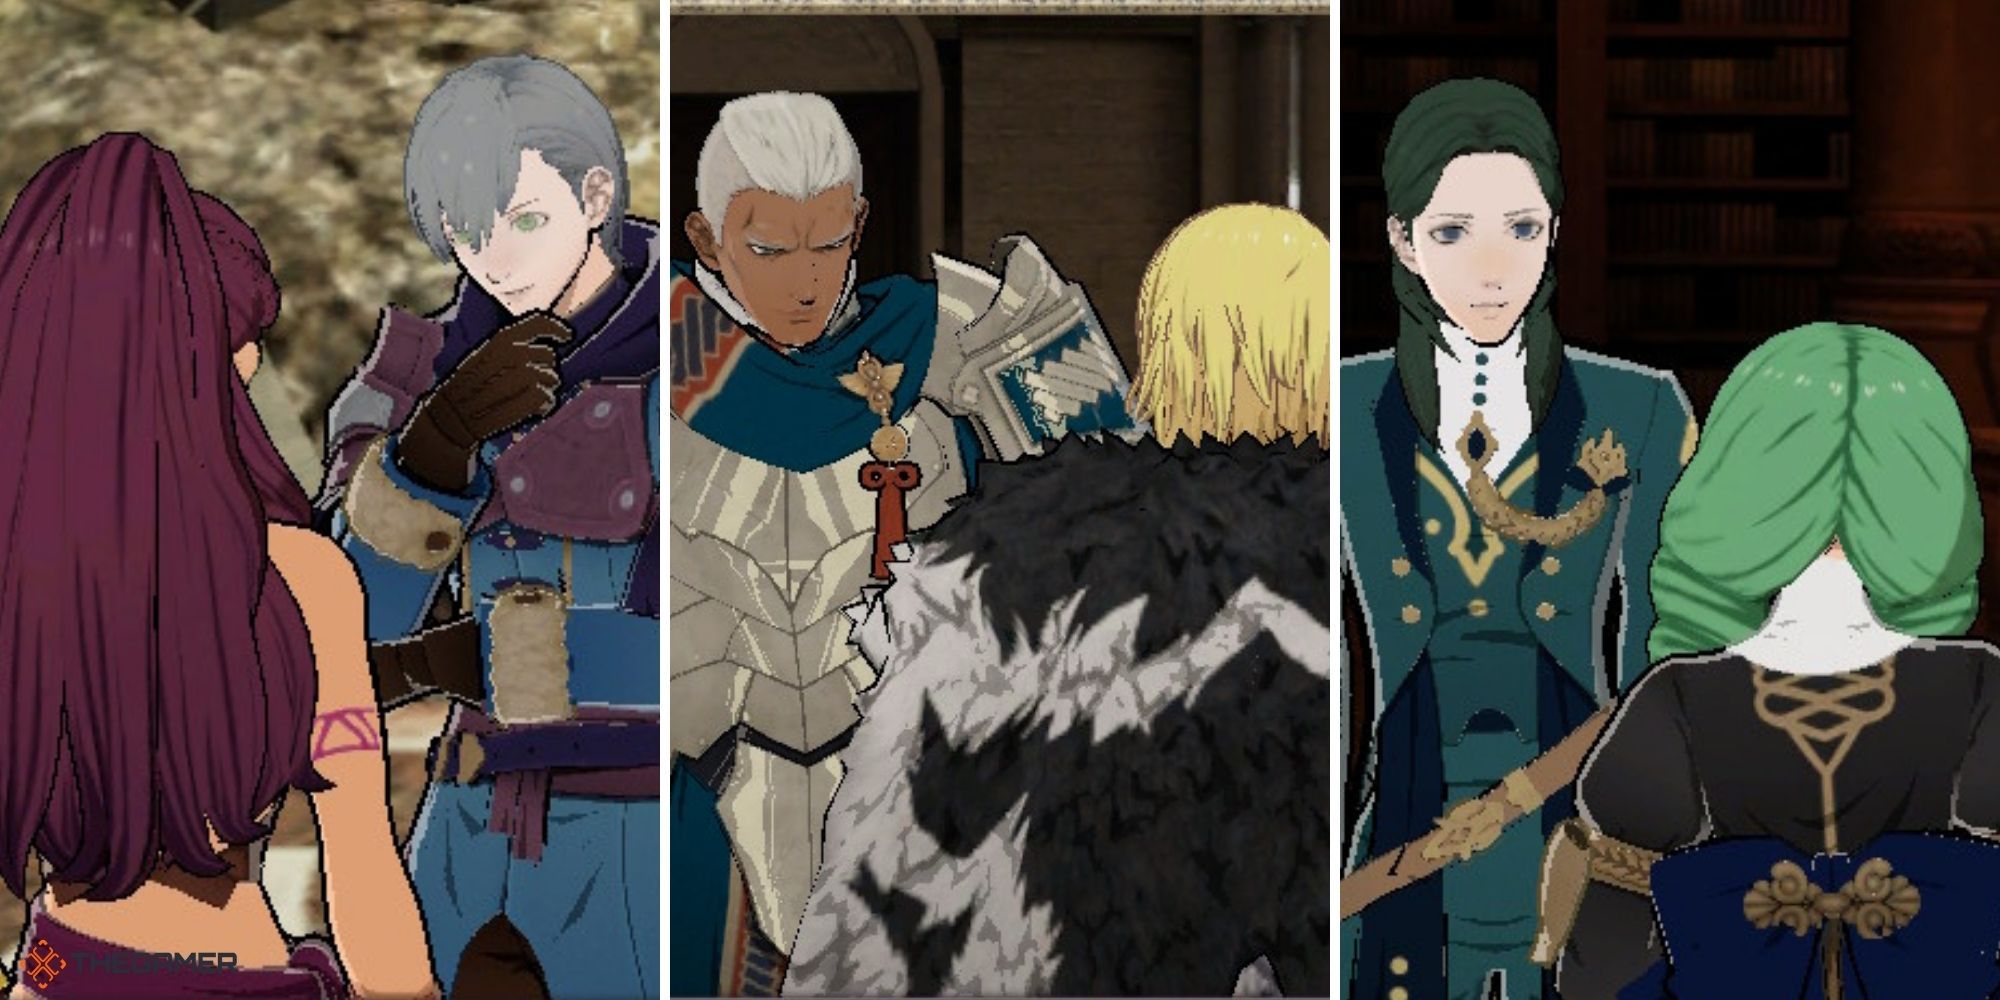 fire-emblem-three-houses-5-support-relationships-every-fan-can-get-behind-5-that-just-seem